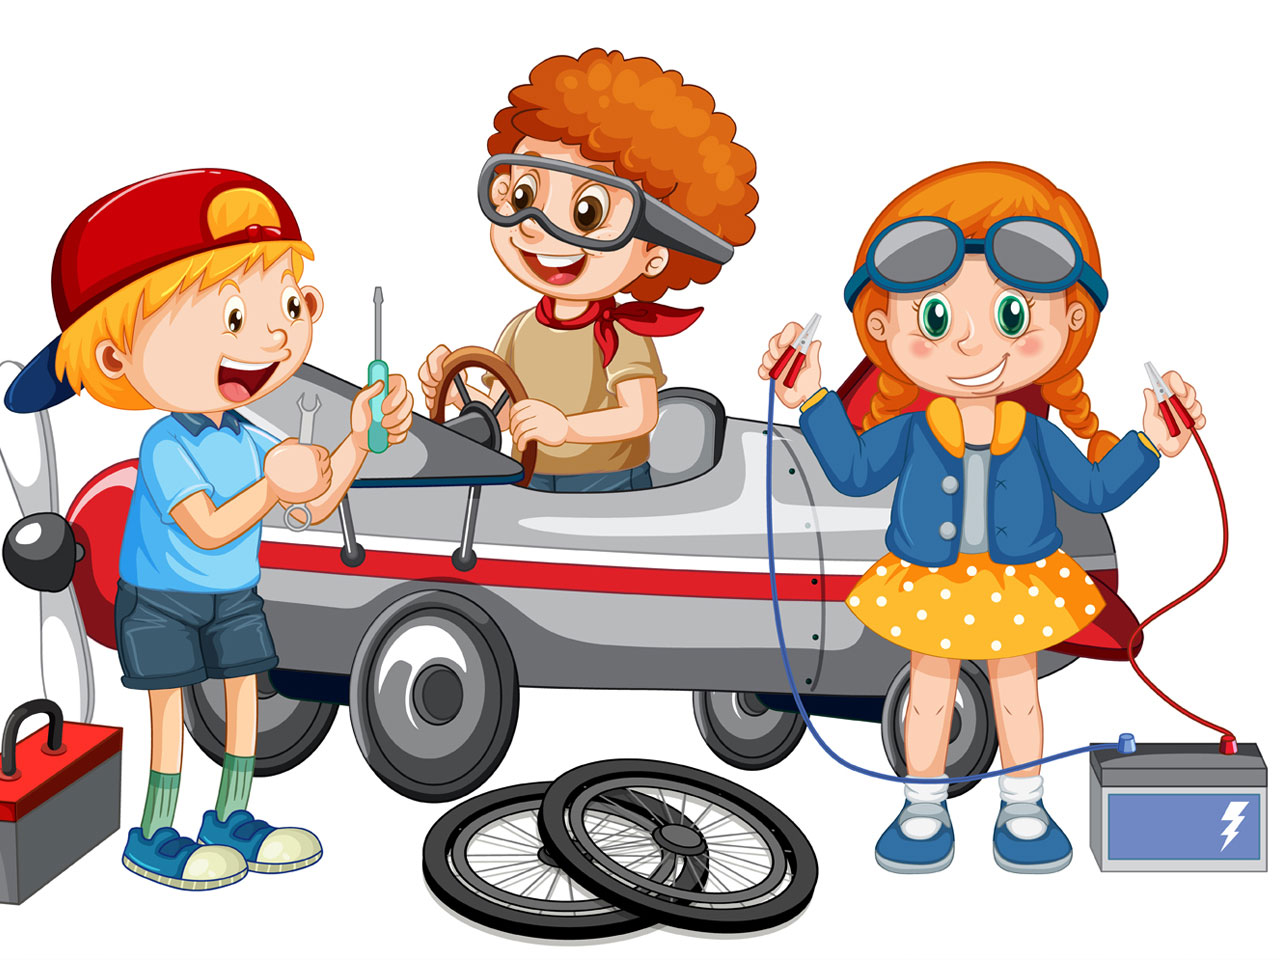 Children repairing plane together clipart image